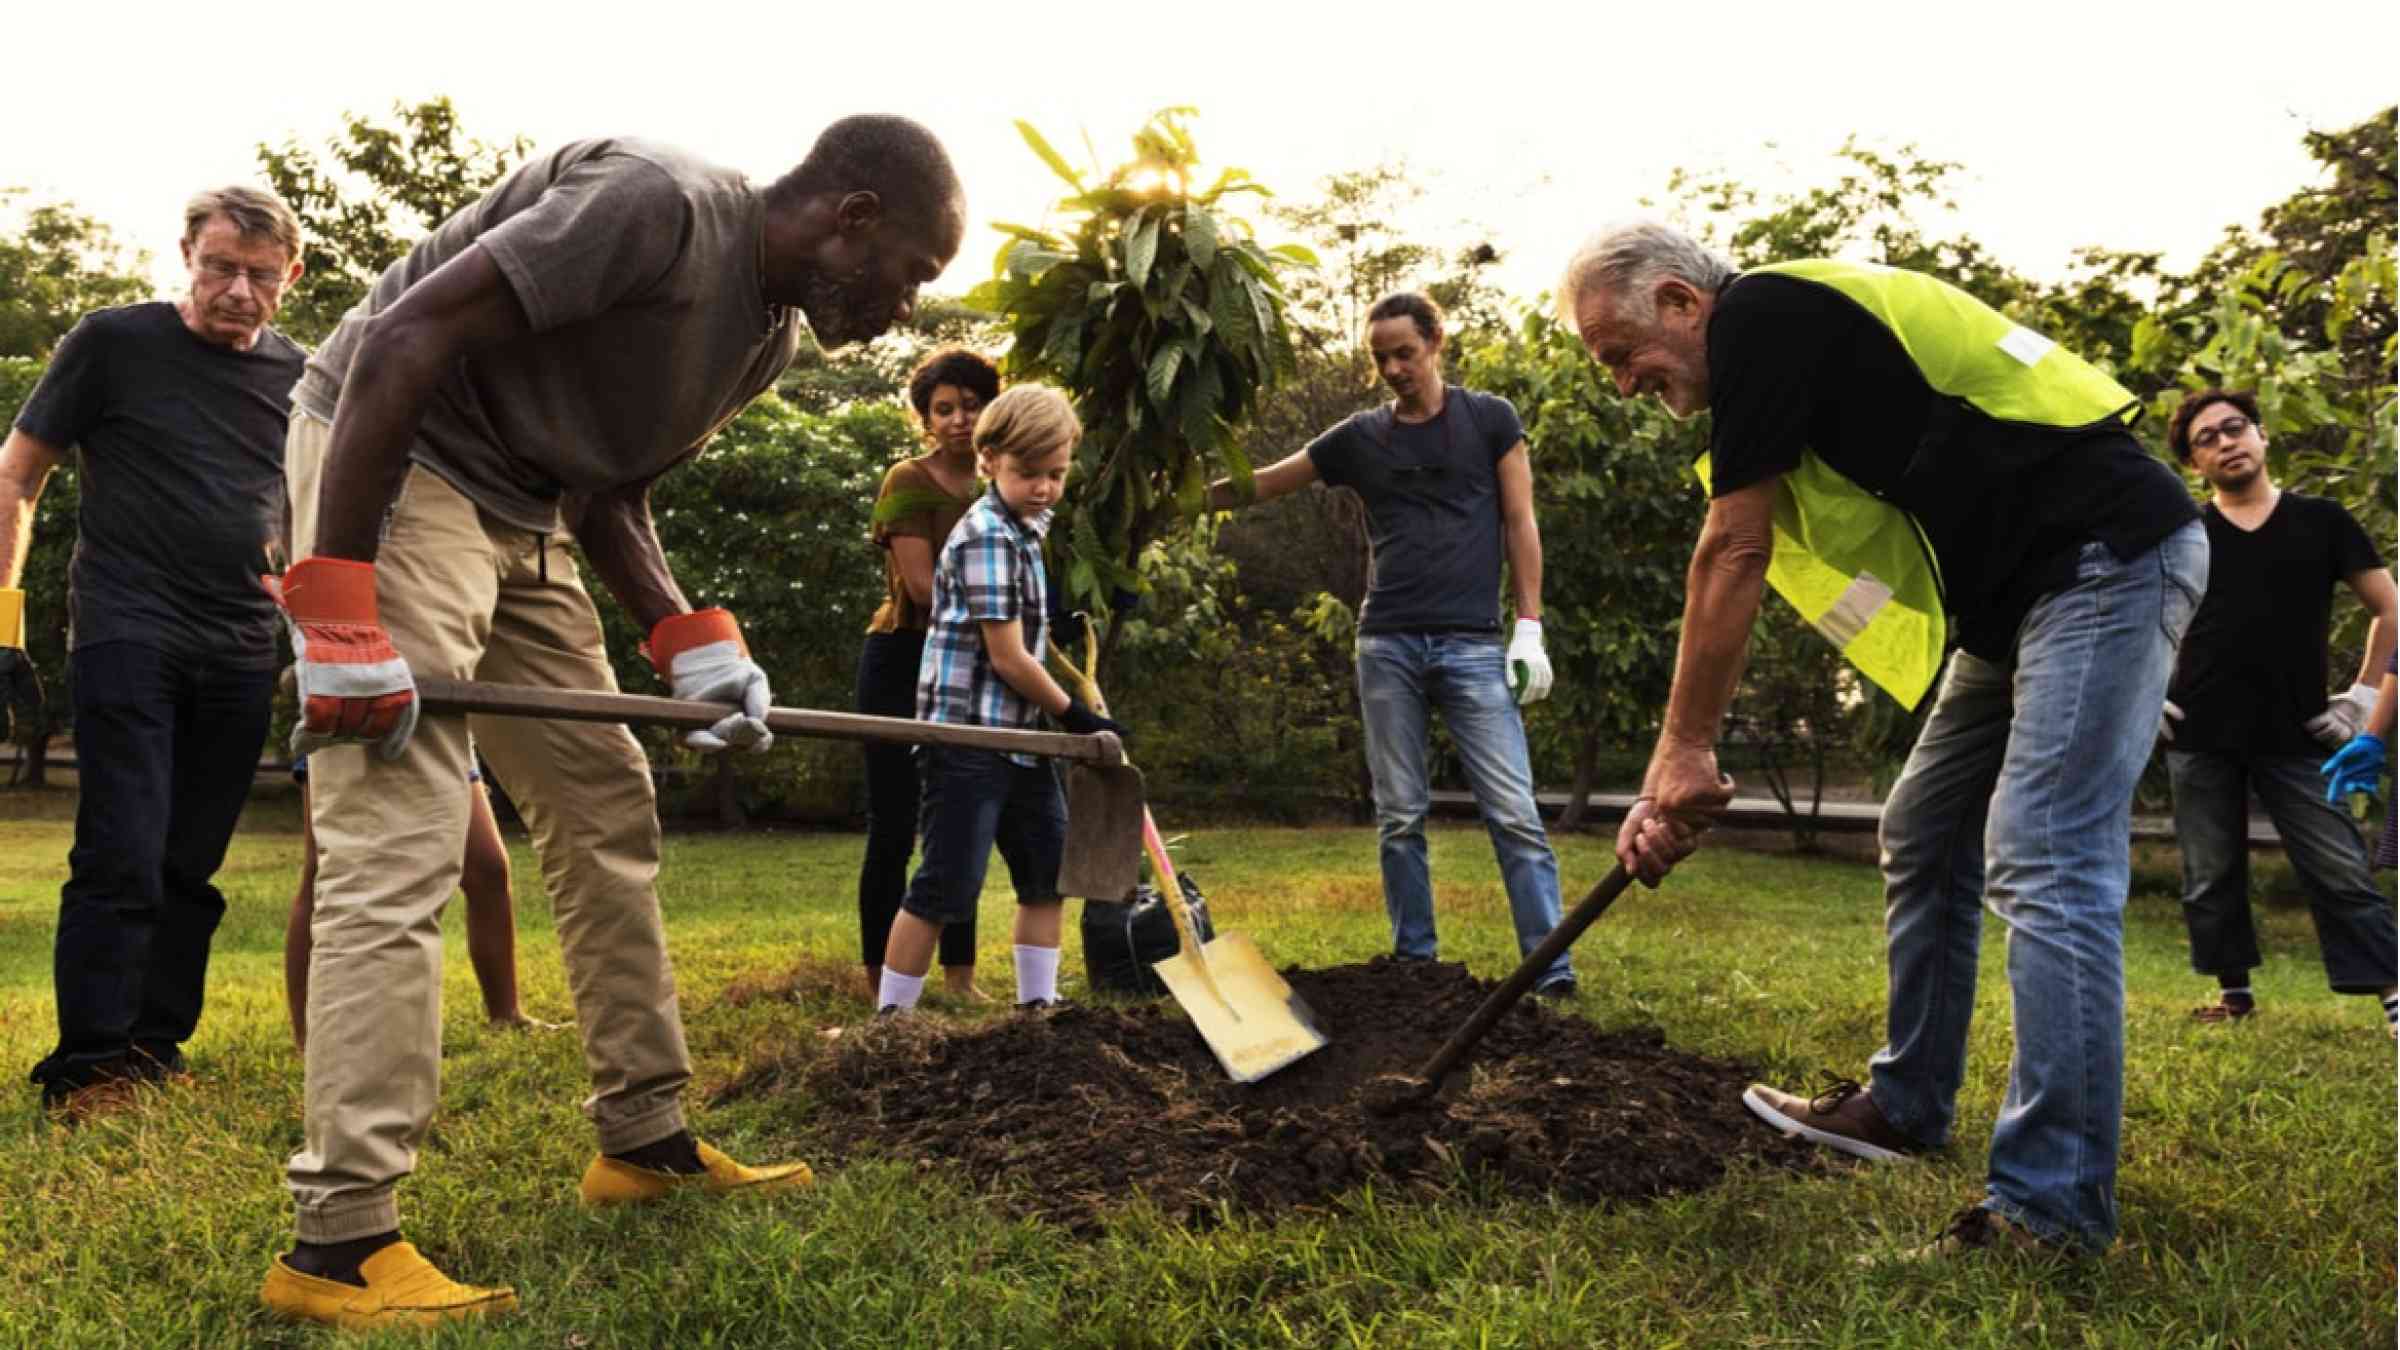 People of different race, age and ethnicities shoveling a hole together in a green space.